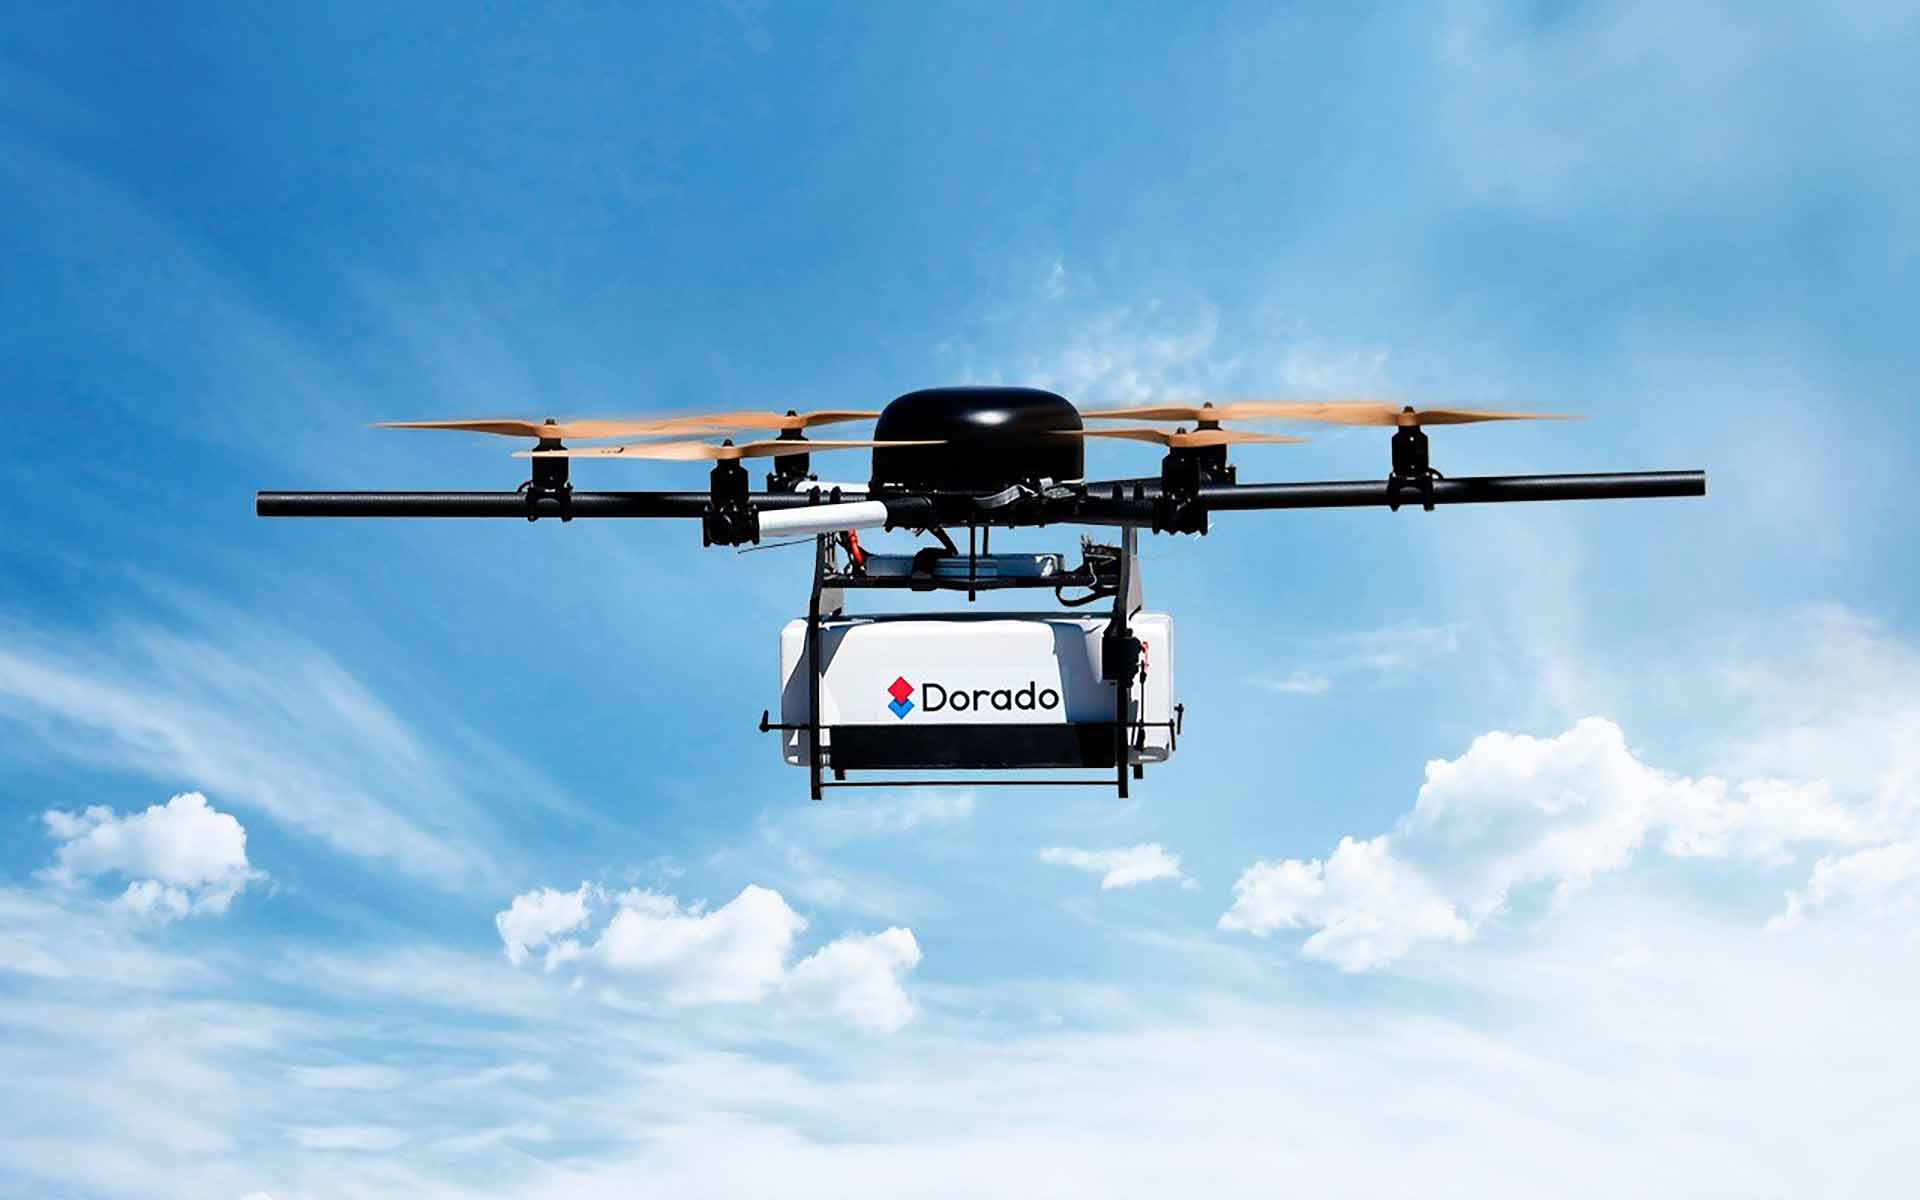 Dorado is Serious about Delivering Goods in 15 Minutes or Less by Drones